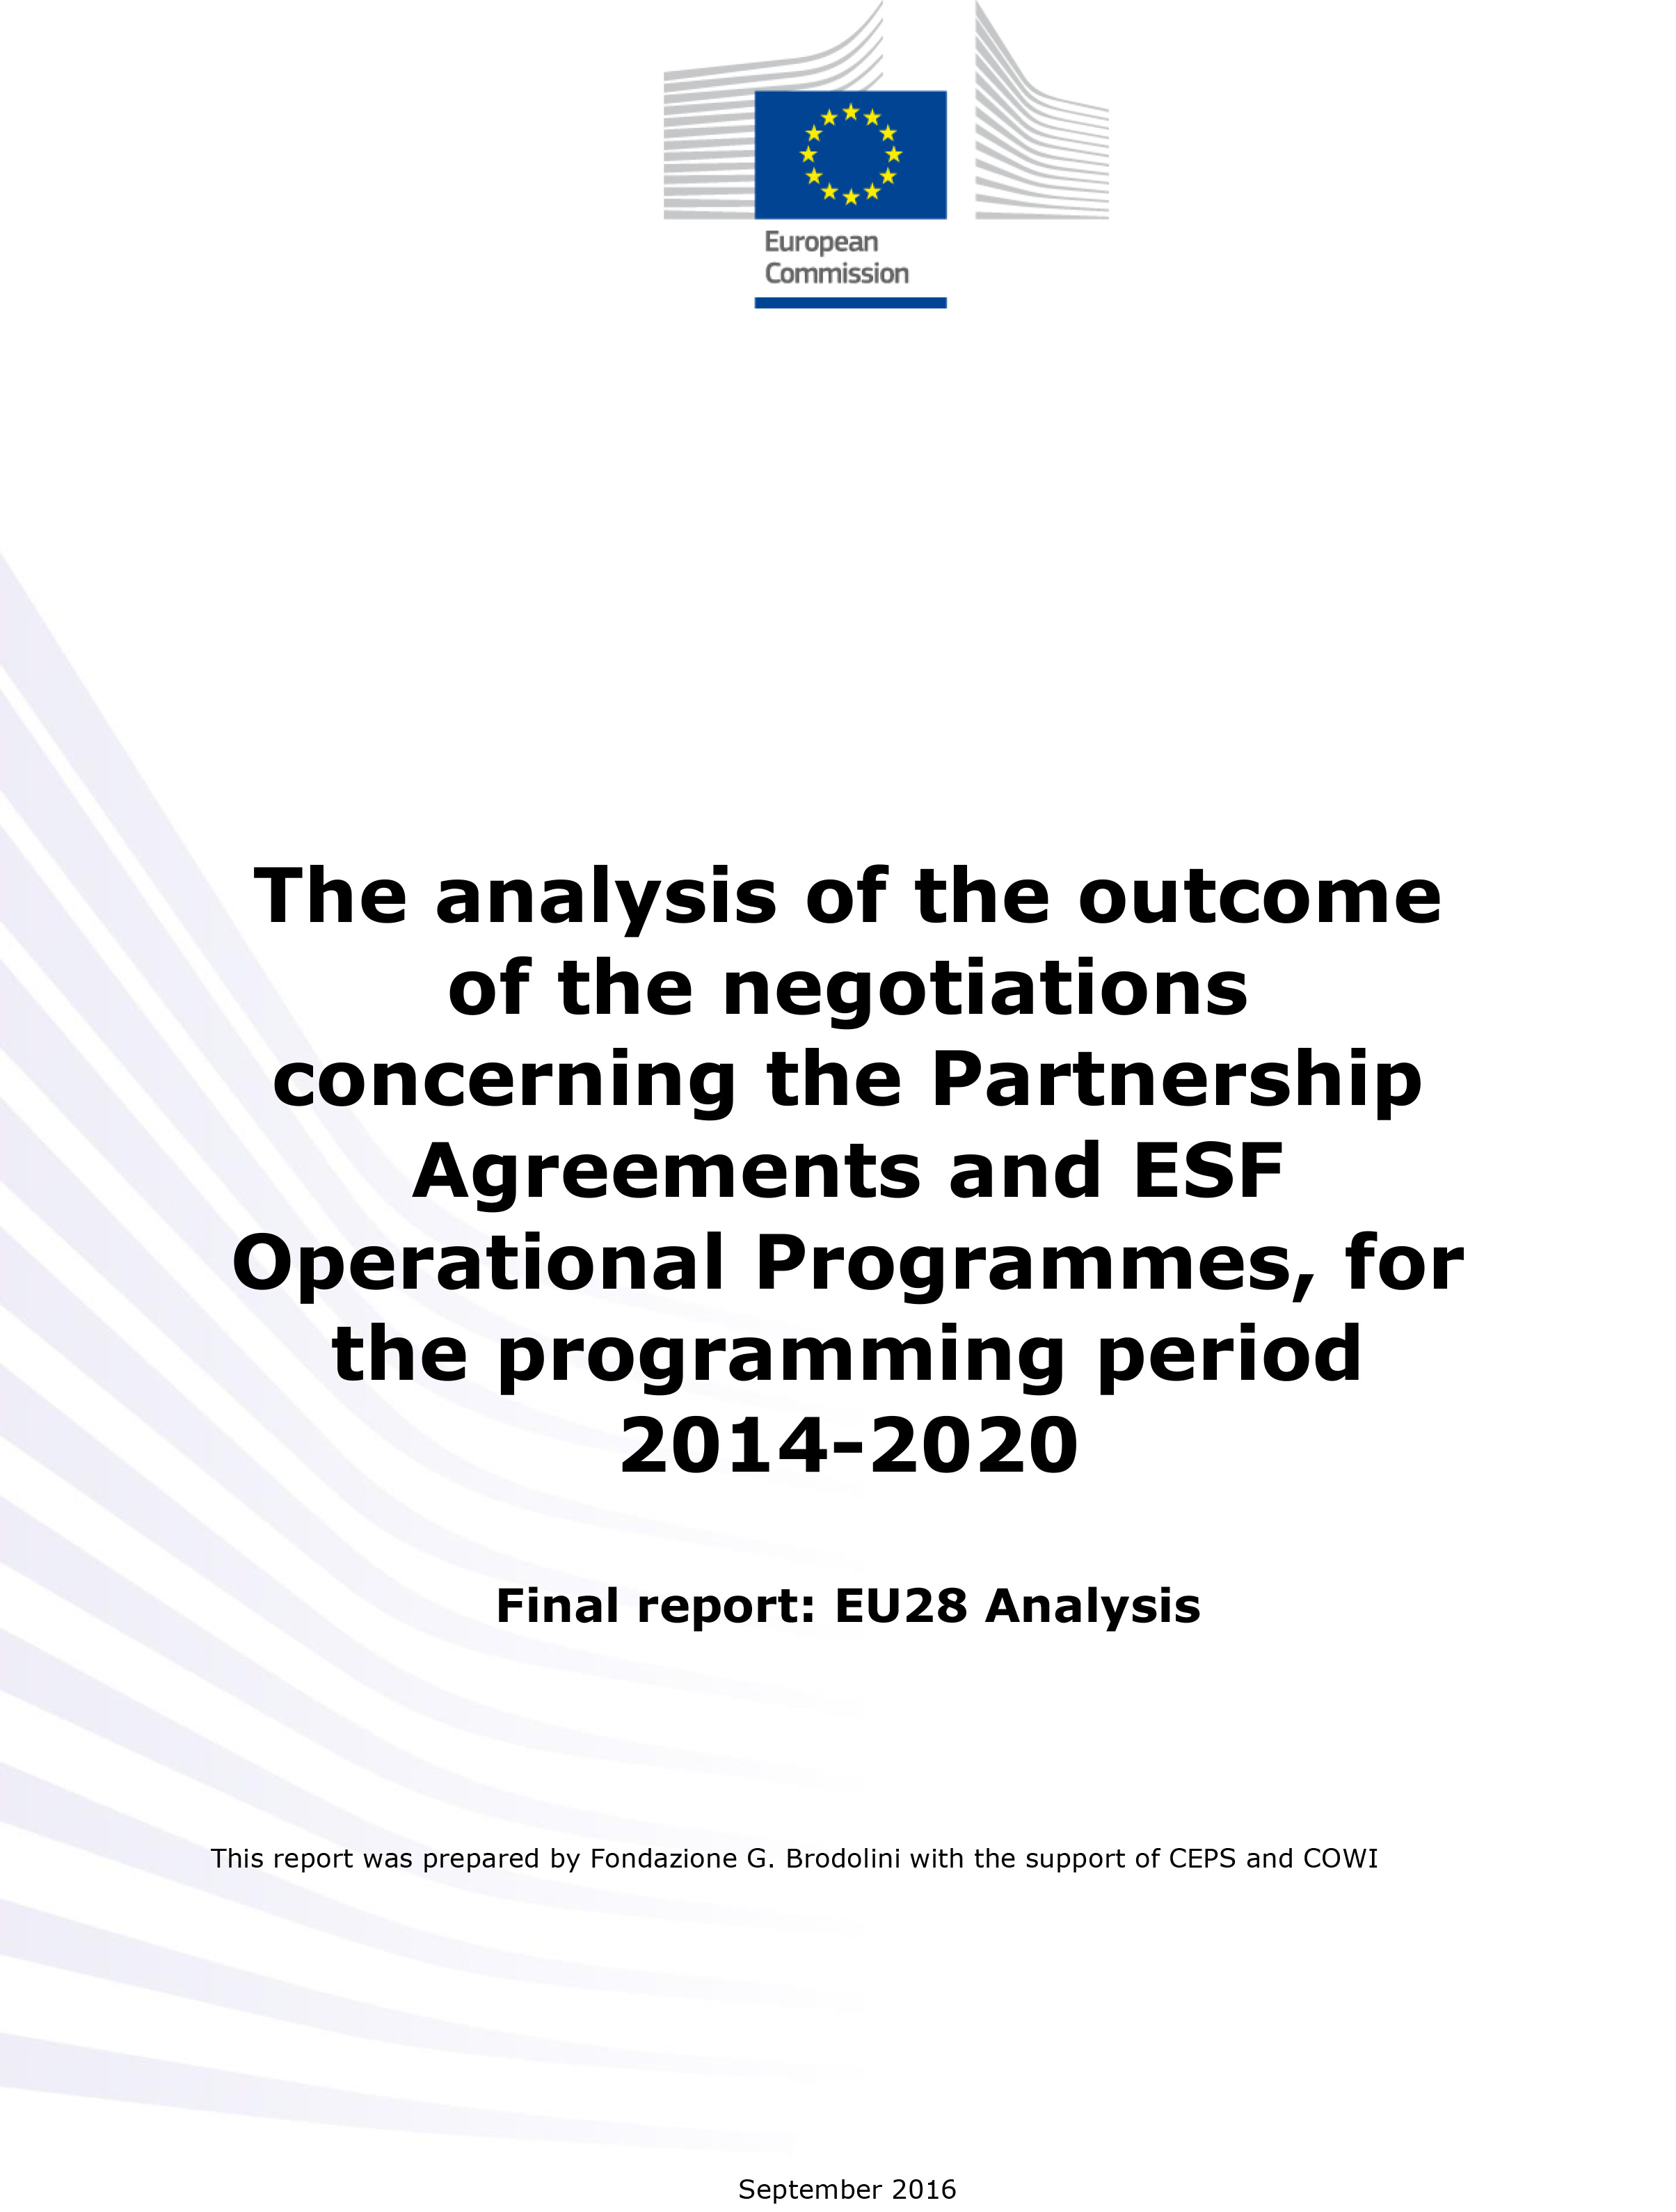 The analysis of the outcome of the negotiations concerning the Partnership Agreements and ESF Operational Programmes, for the programming period 2014-2020